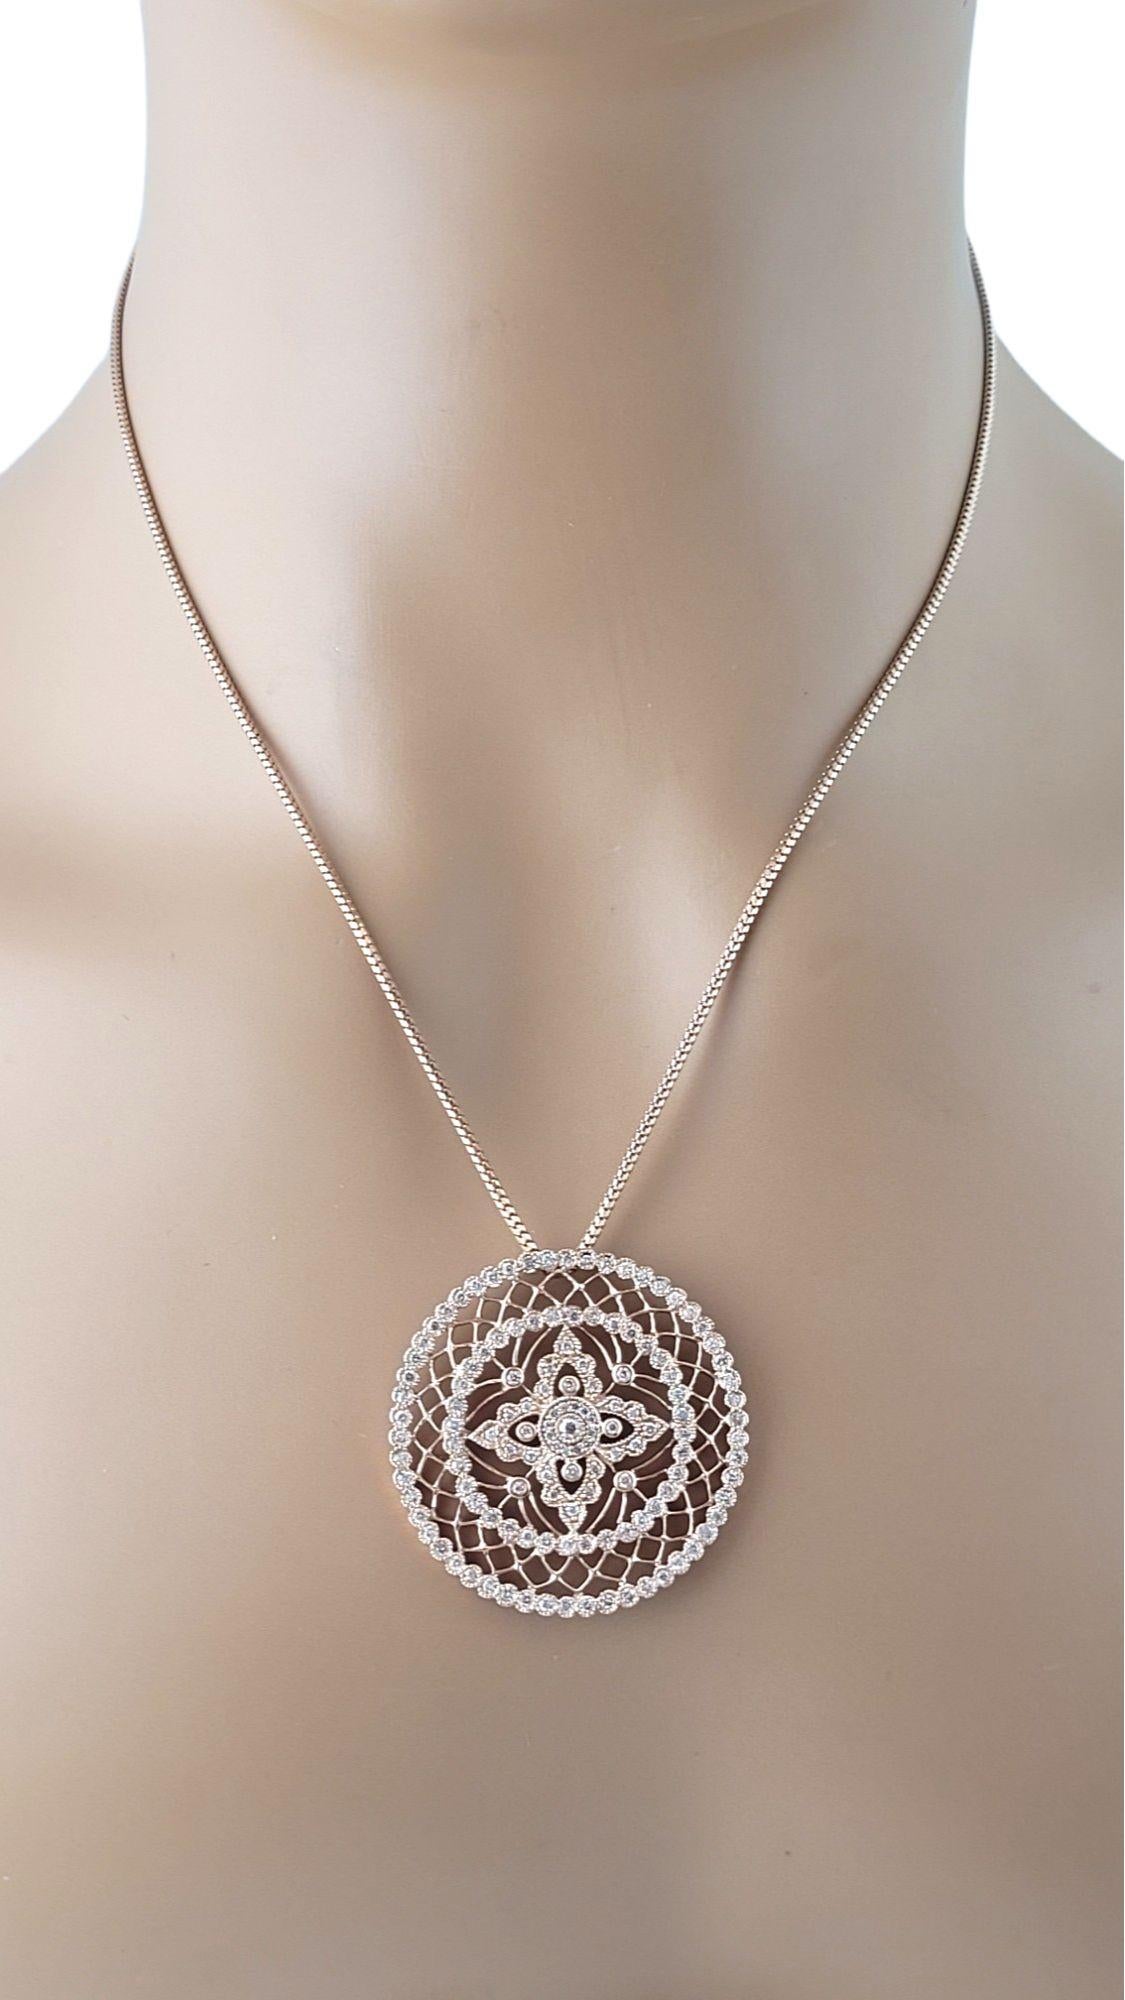 Vintage 14 Karat Rose22 Gold Diamond Pendant Necklace-

This fabulous piece will make any ensemble a showstopper!

Beautiful rose gold chain and pendant featuring 131 round brilliant cut diamonds set in exquisitely designed 14K gold.

Approximate